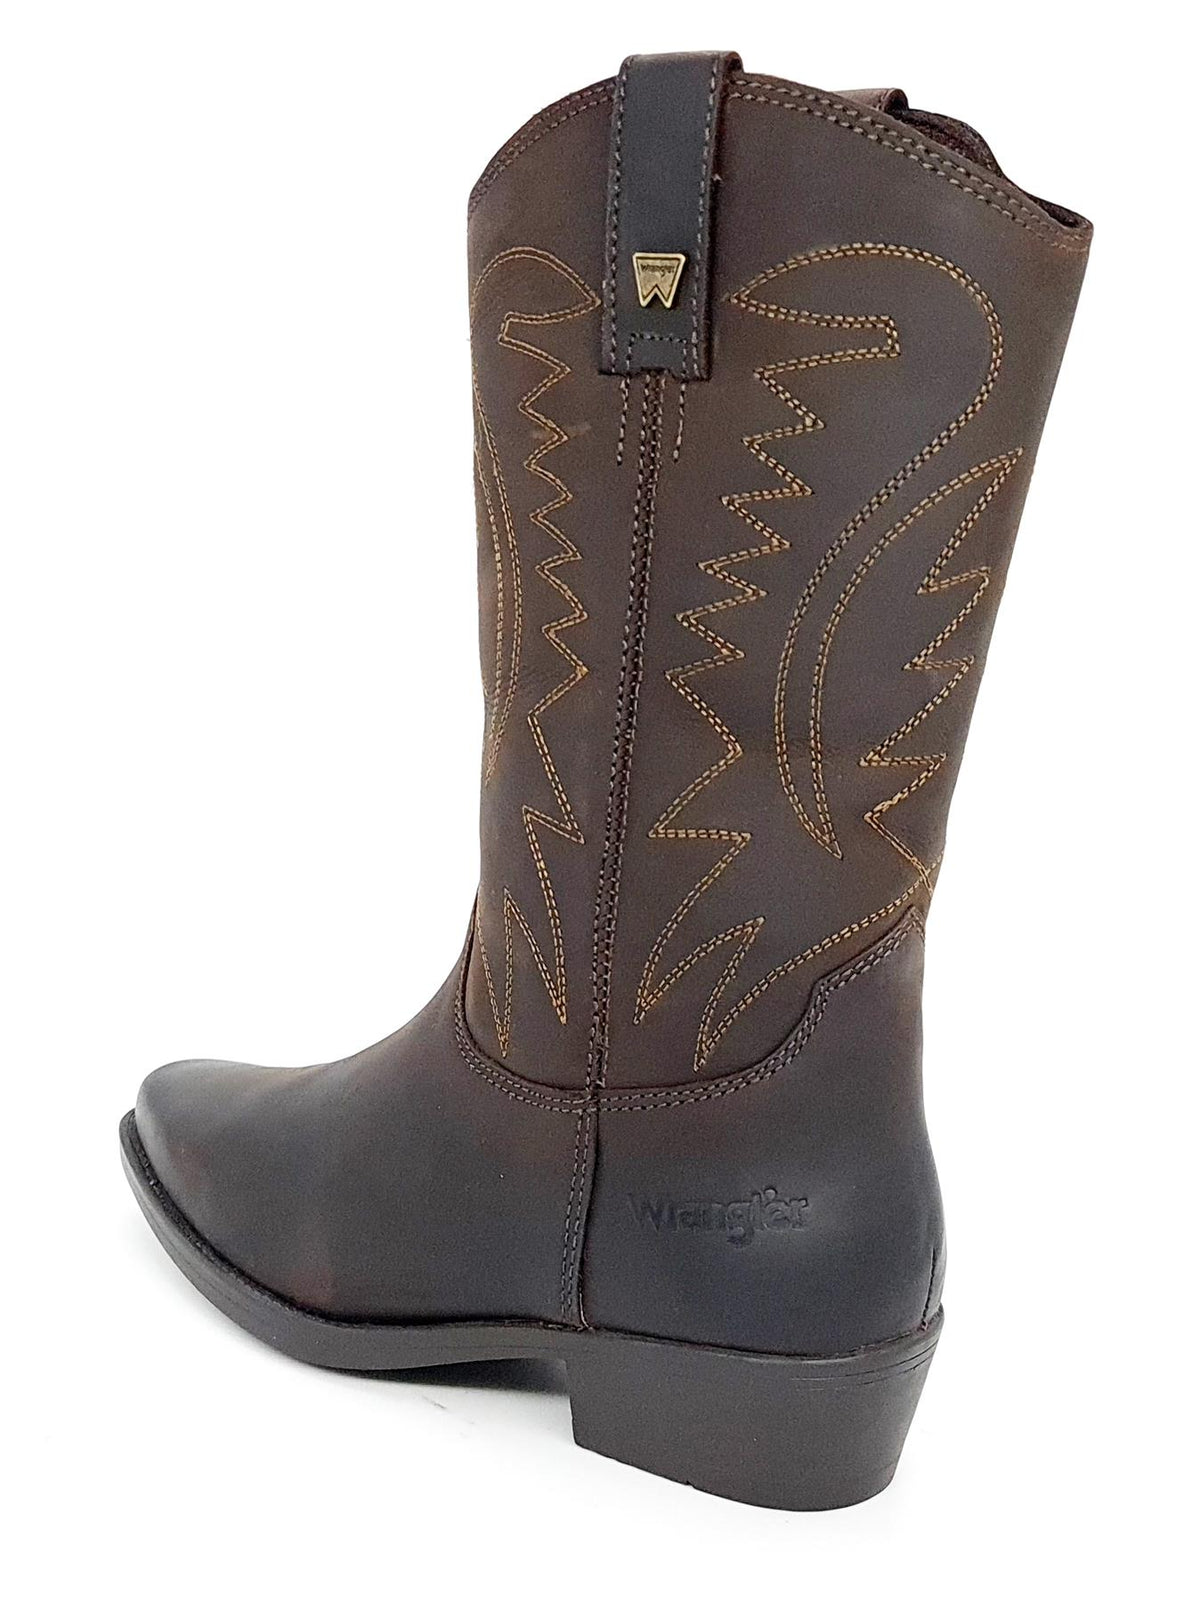 Wrangler Tex Hi Mens Leather Pull on Pointed Cowboy Western Boots